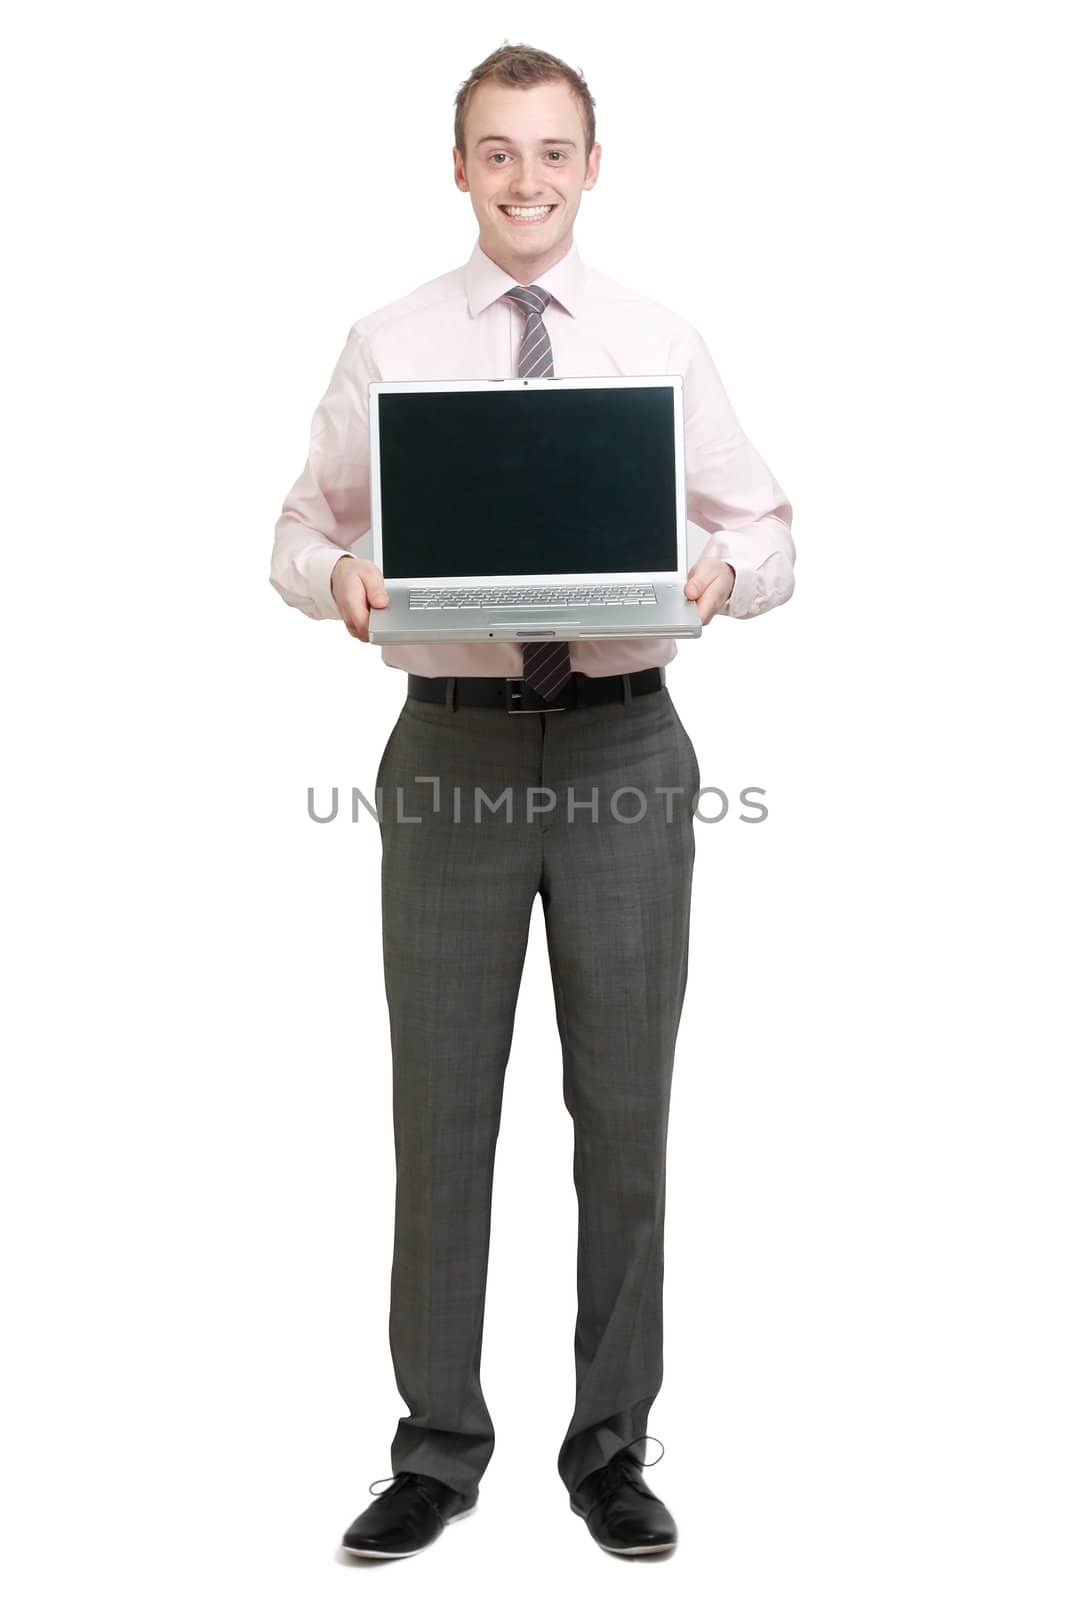 A business man presenting on a laptop